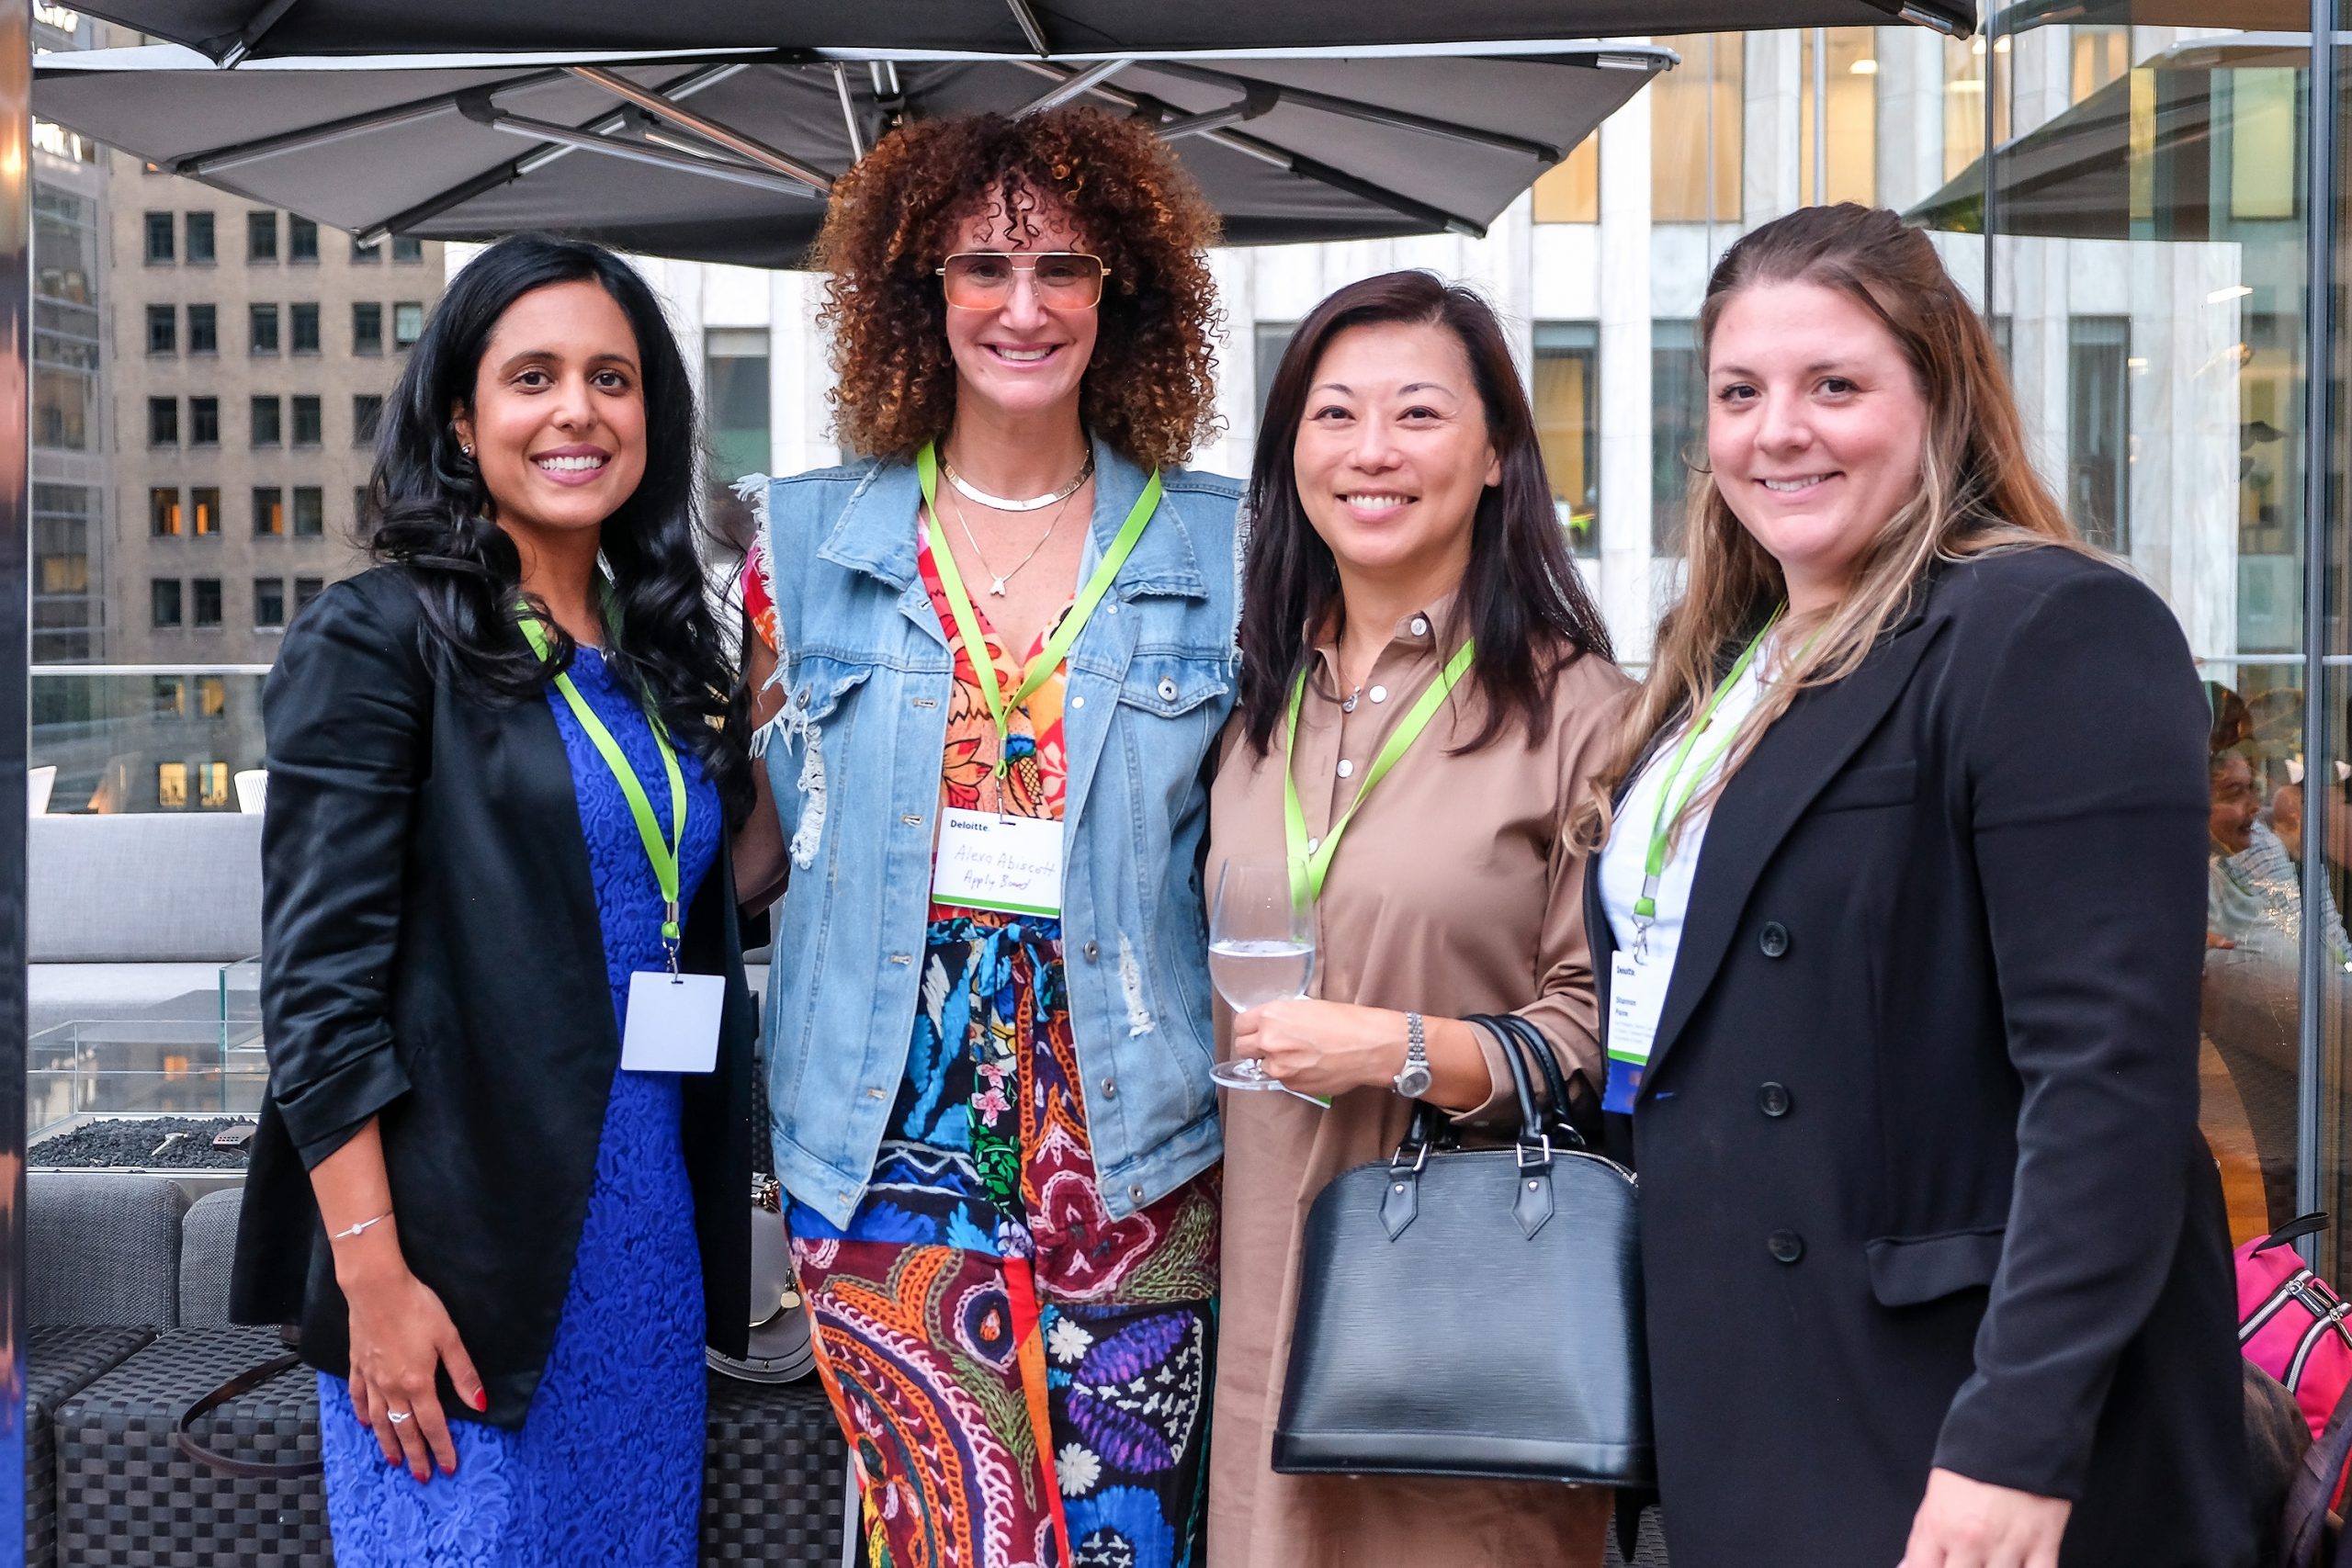 Four members of the WLAO posing for a picture as they smile and enjoy beverages at a networking event.